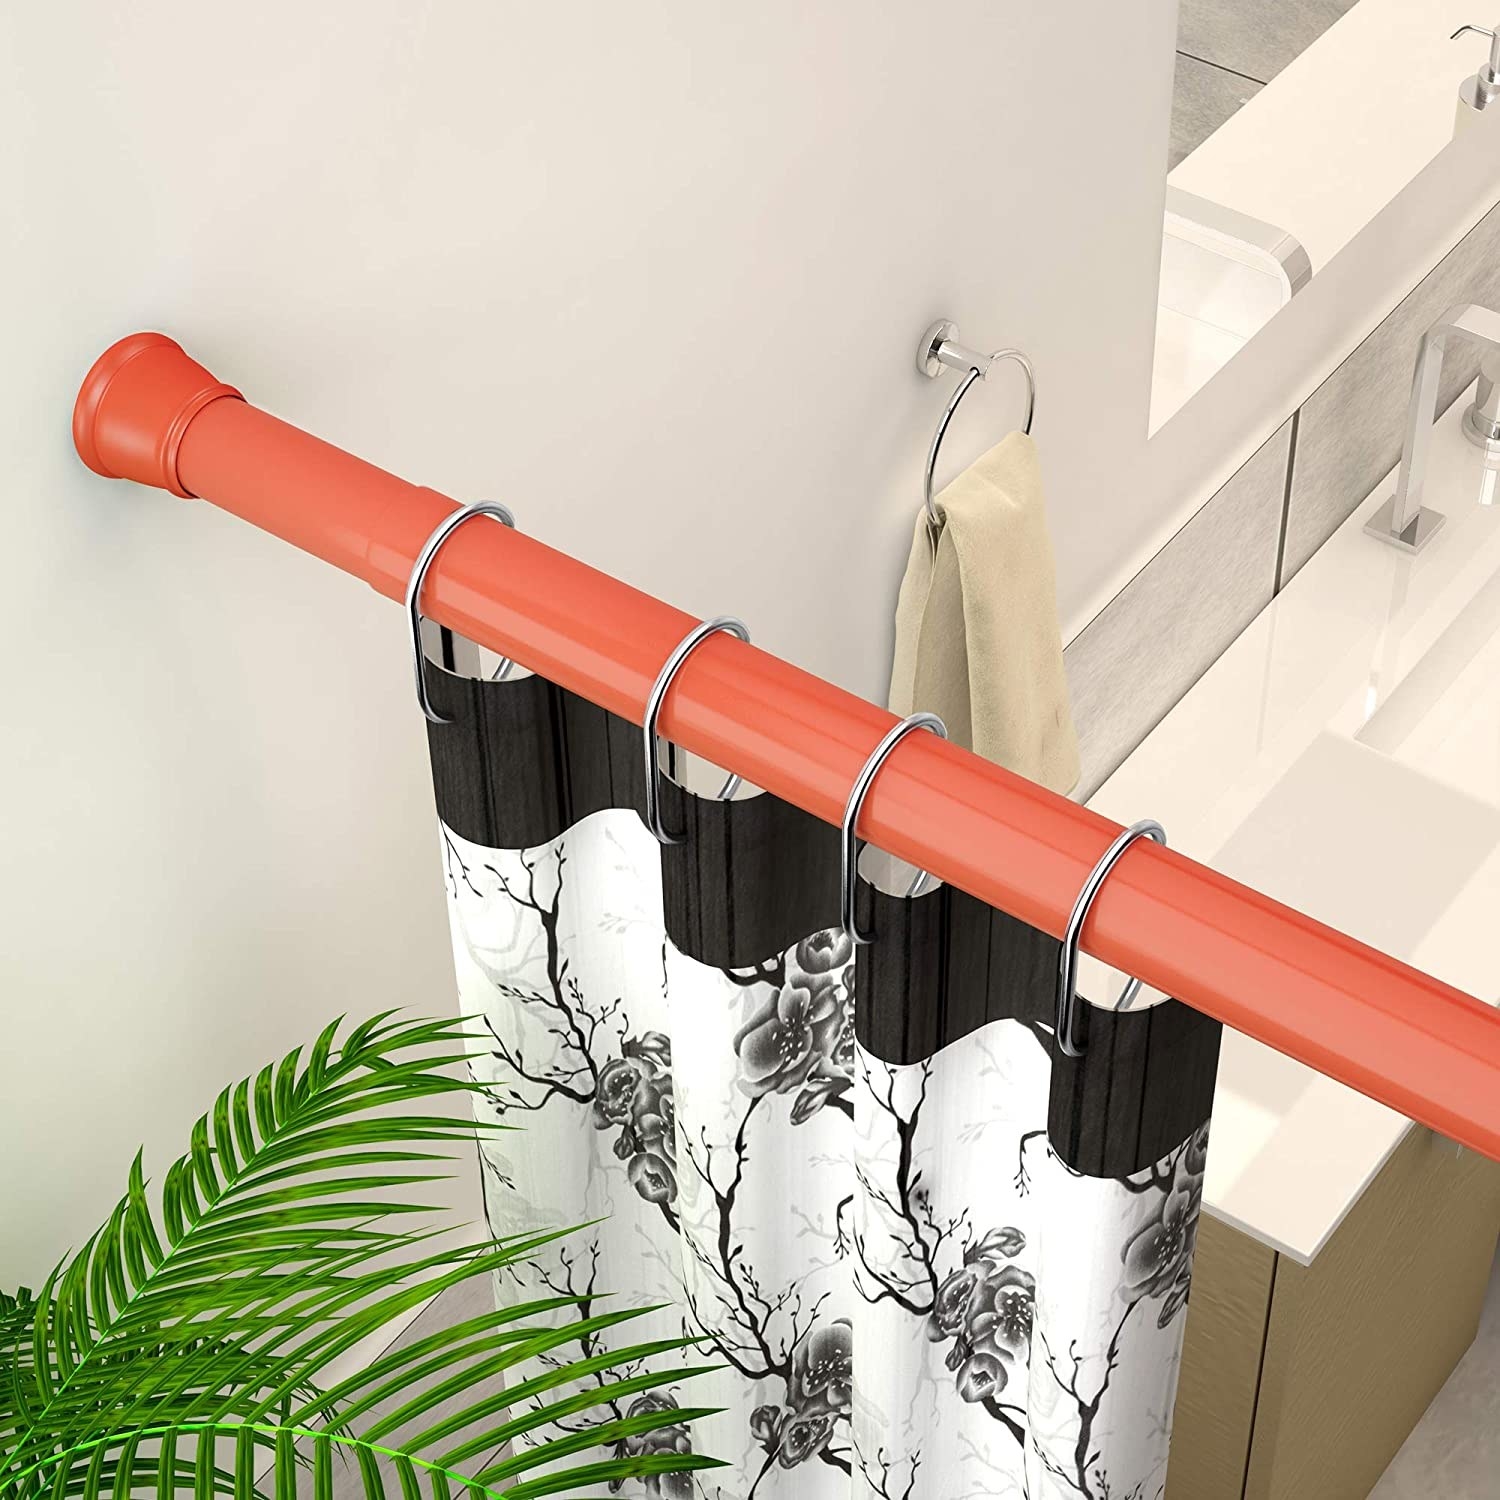 A red shower rod with black and white curtains